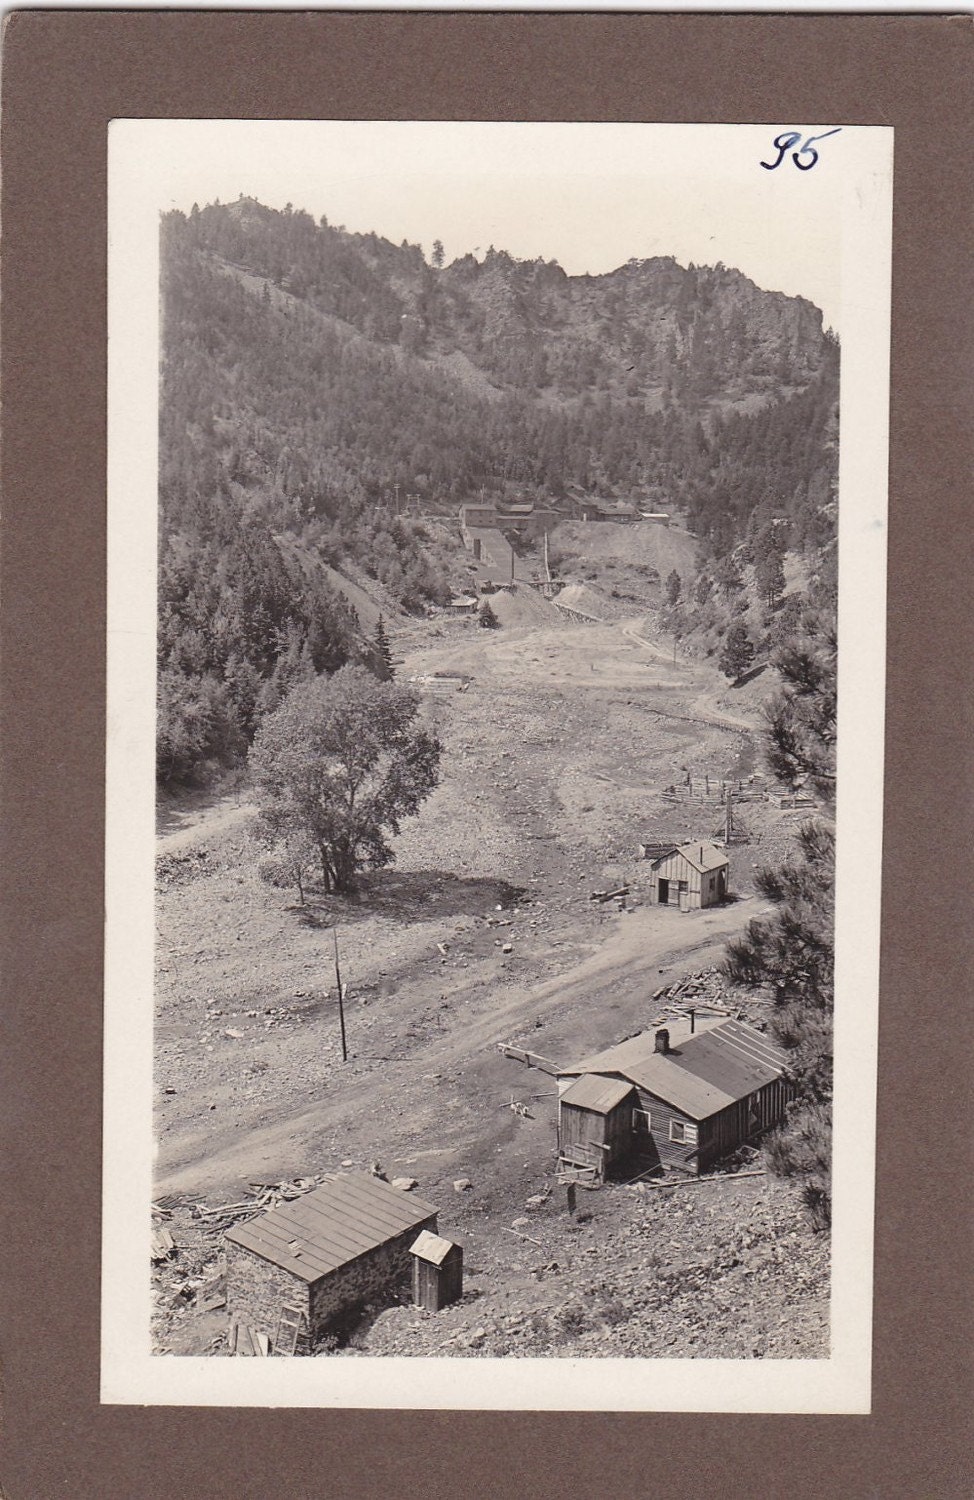 Vintage Black and White Photograph Peerless Mining Town Area